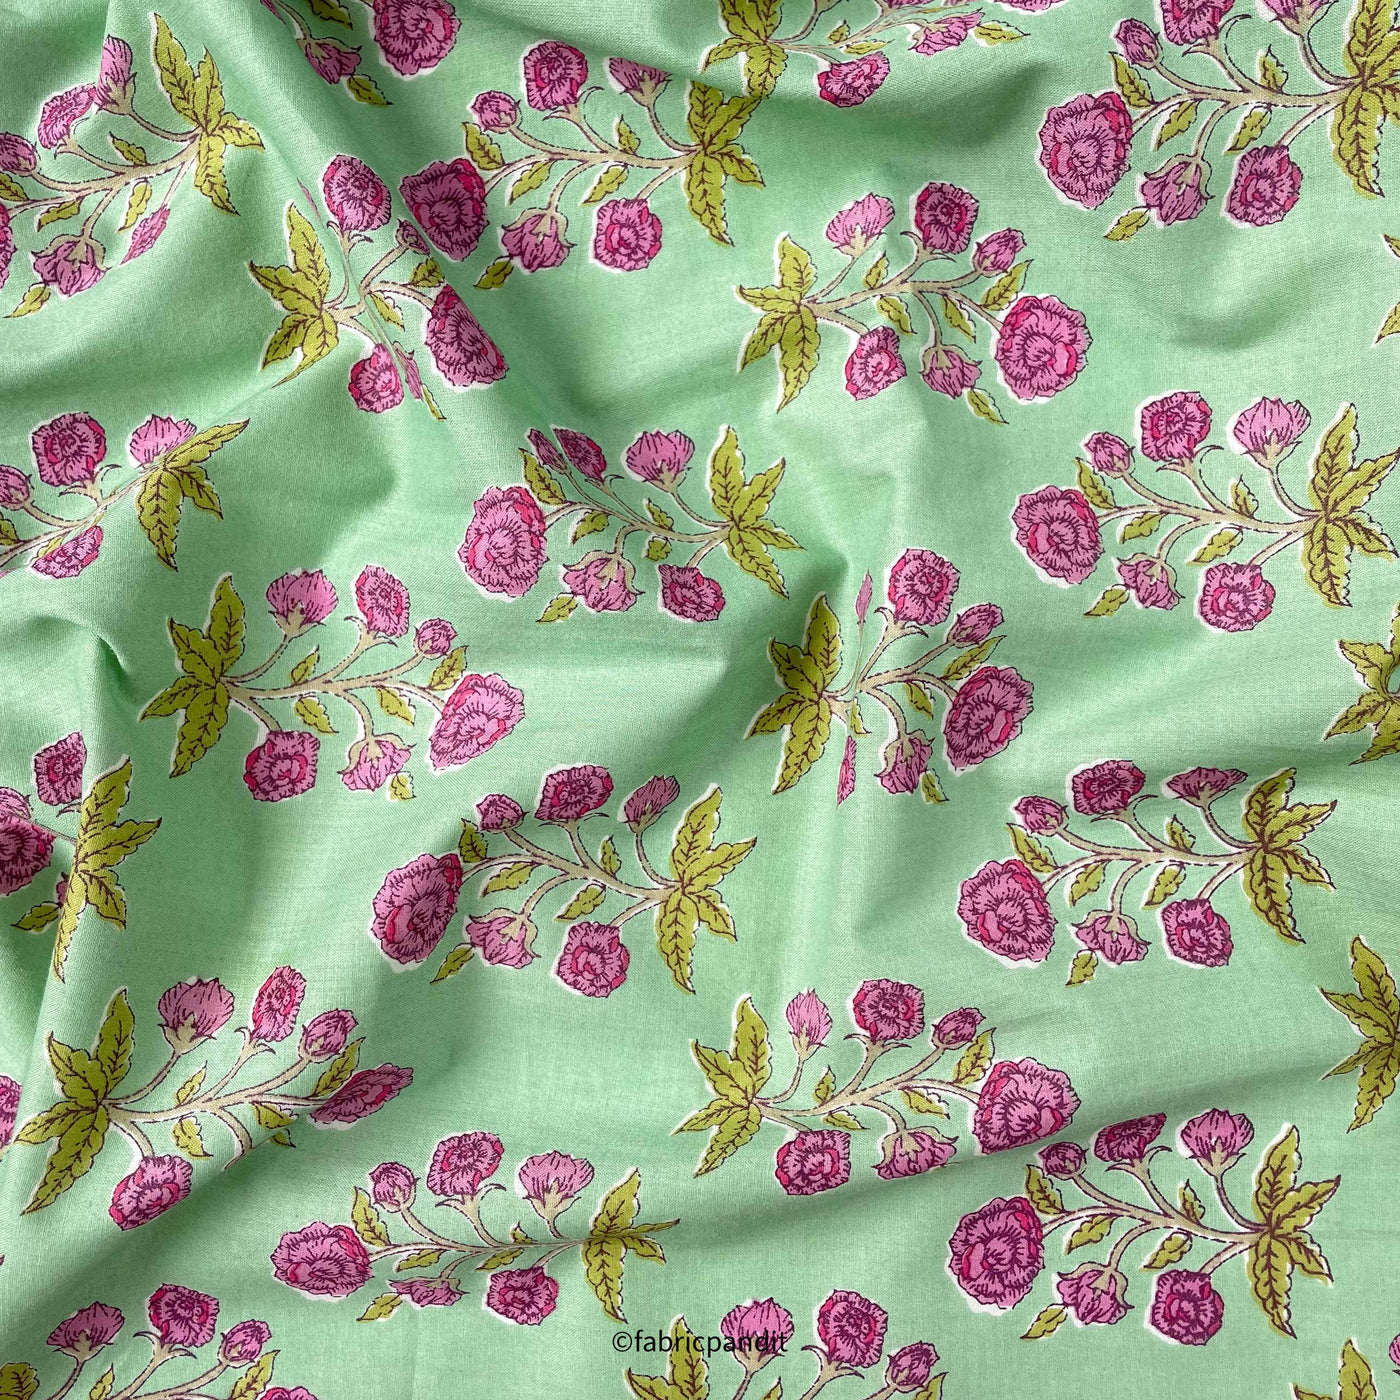 Fabric Pandit Fabric Turquoise & Magenta Floral Bunch Hand Block Printed Pure Cotton Fabric (Width 42 inches)